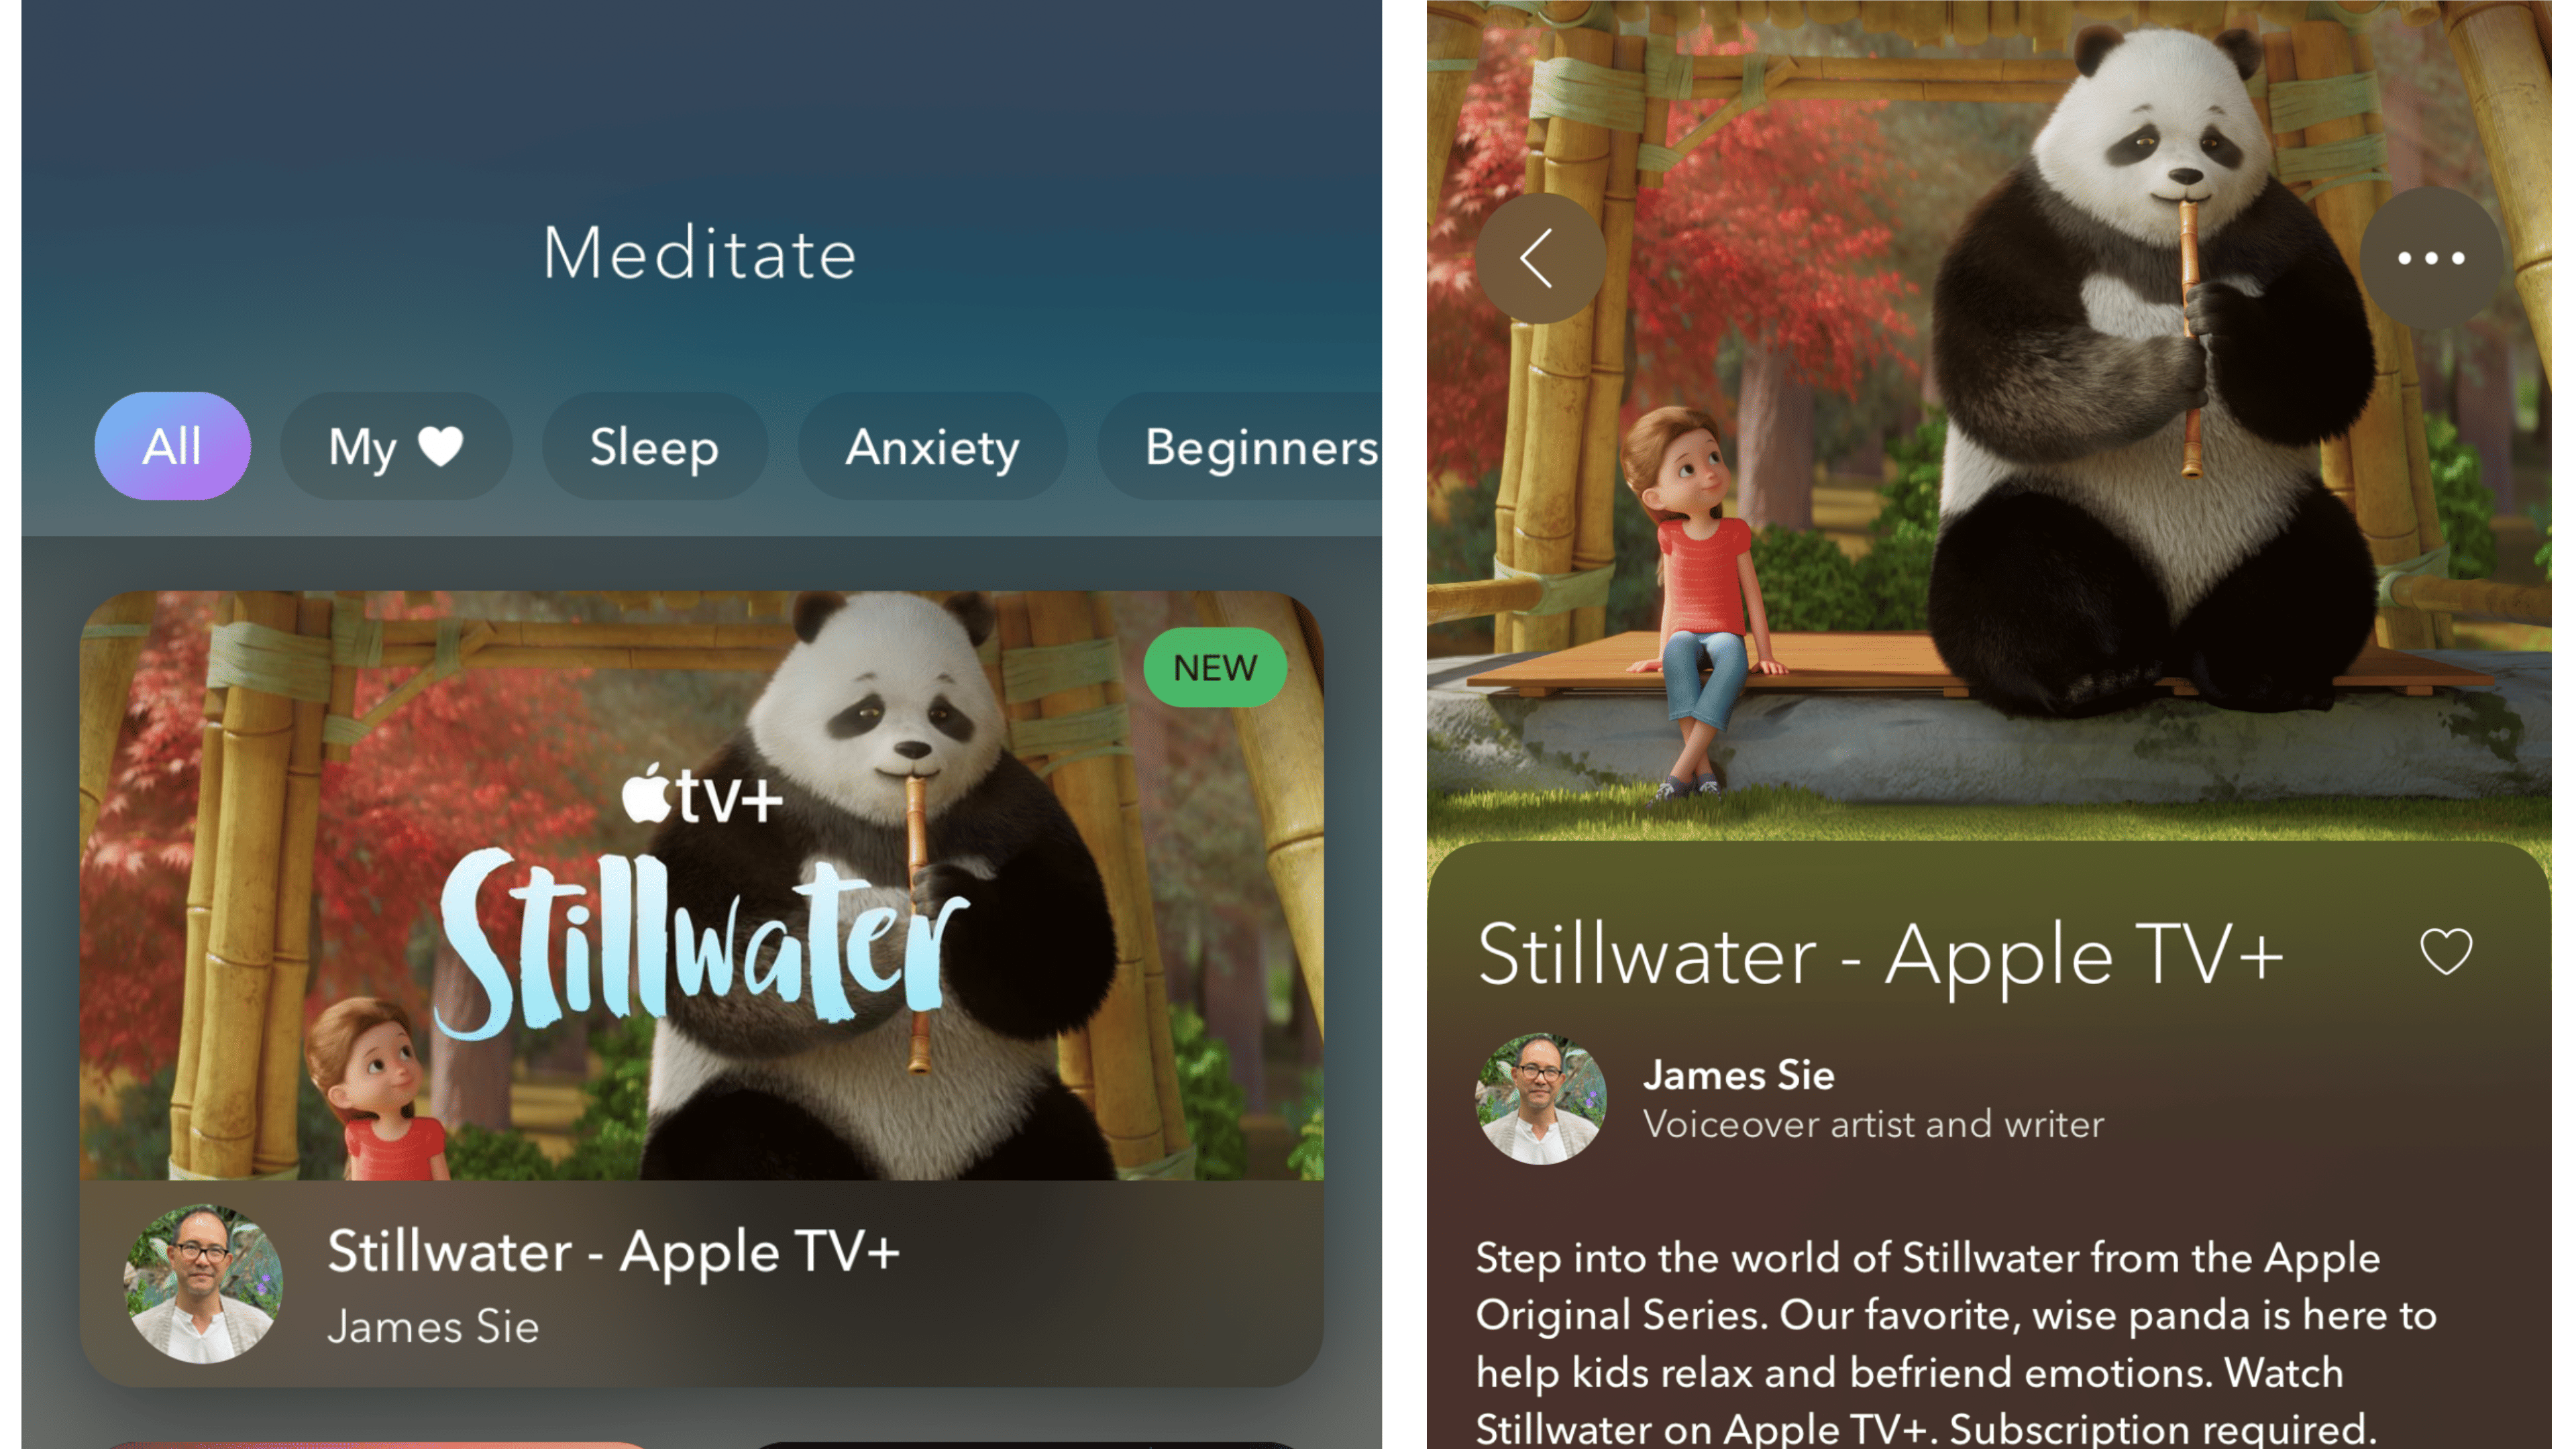 ‘Stillwater’ Meditations Available in Calm Mindfulness App